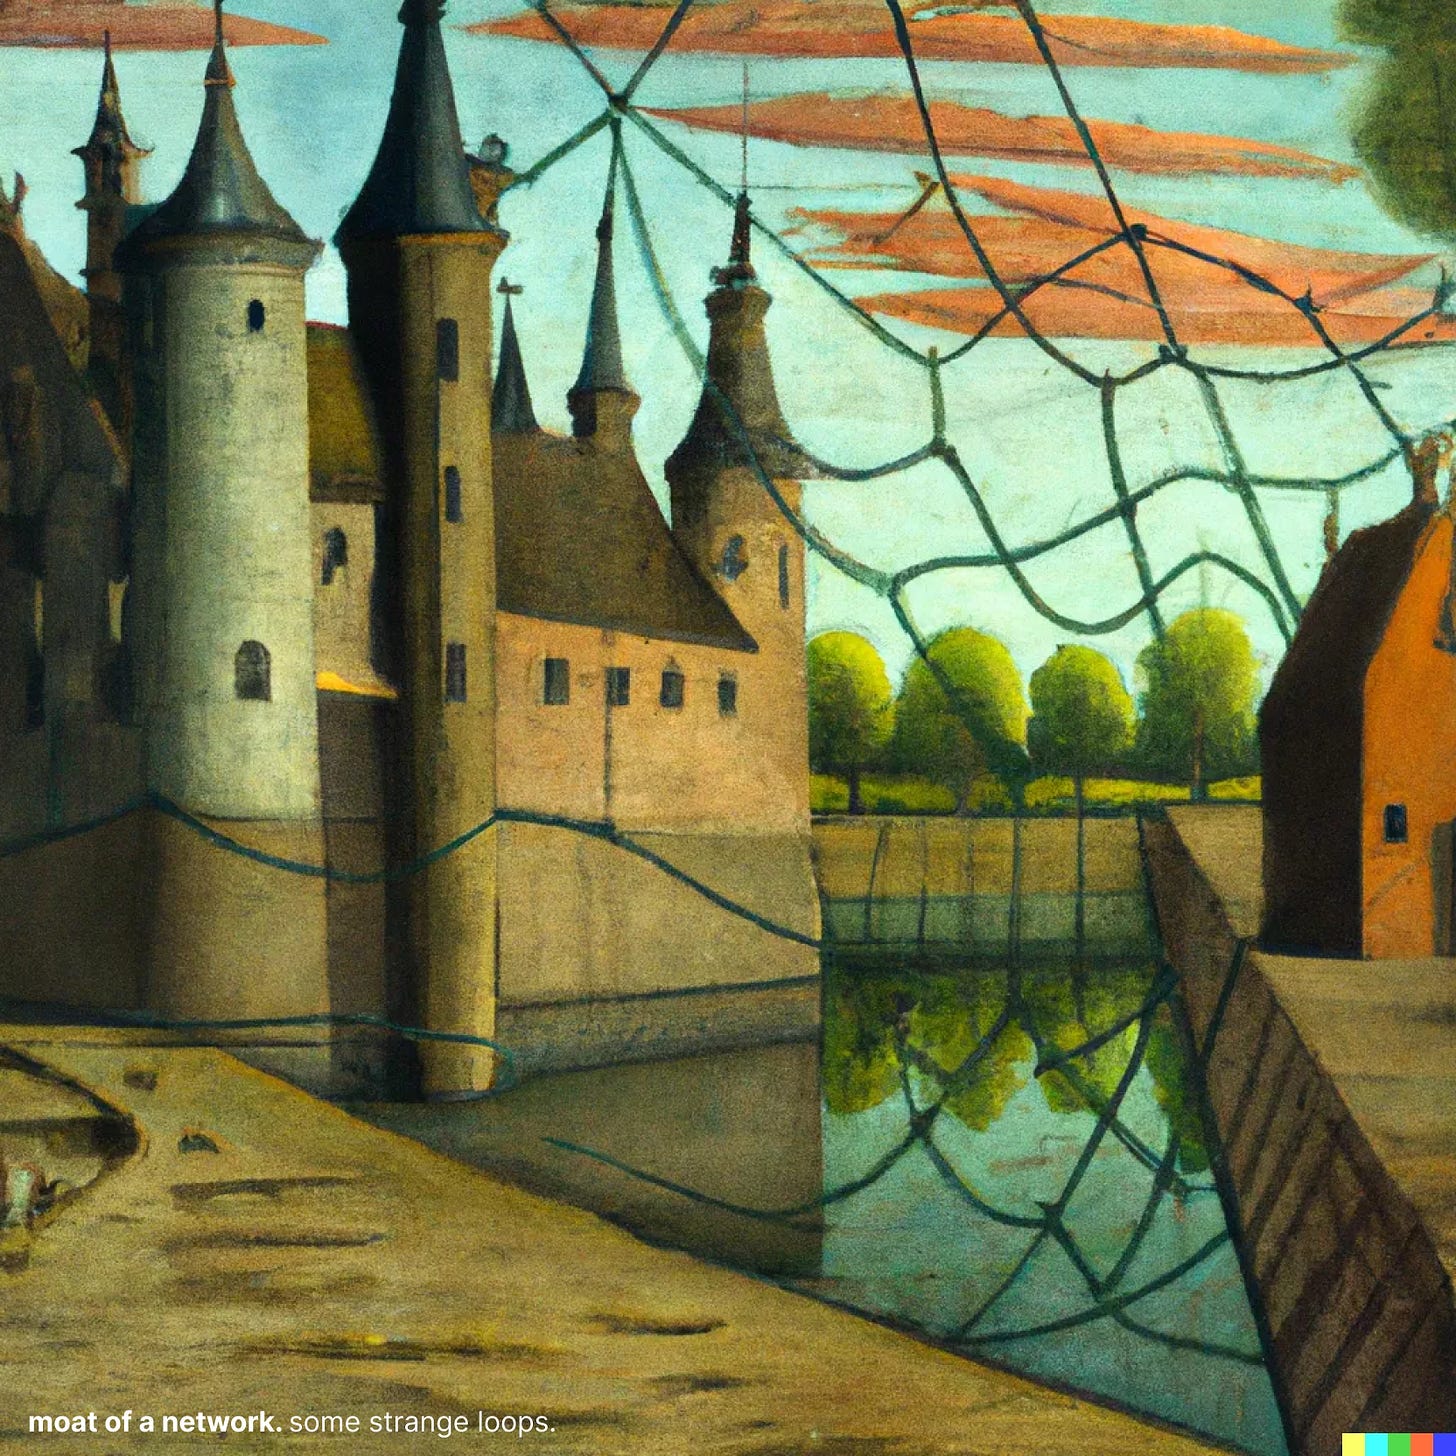 Moat of a Network in the Style of Hieronymus Bosch by DALL·E 2